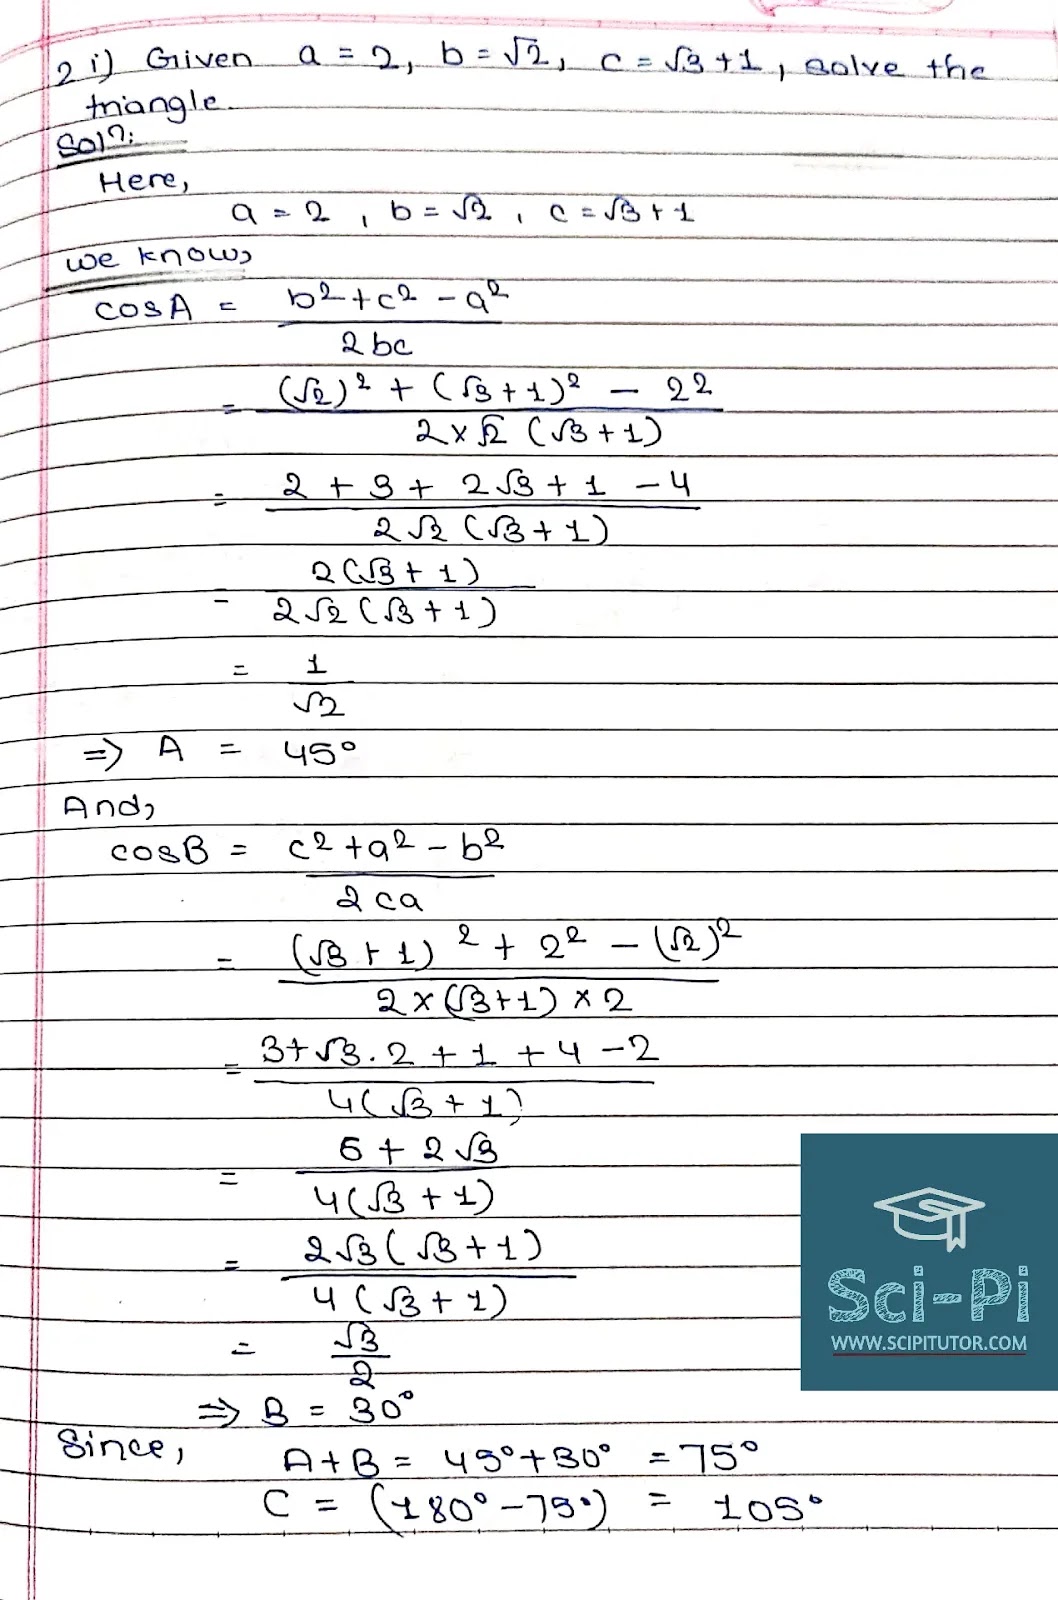 Solutions of Triangle Basic Mathematics Grade 11 Solutions